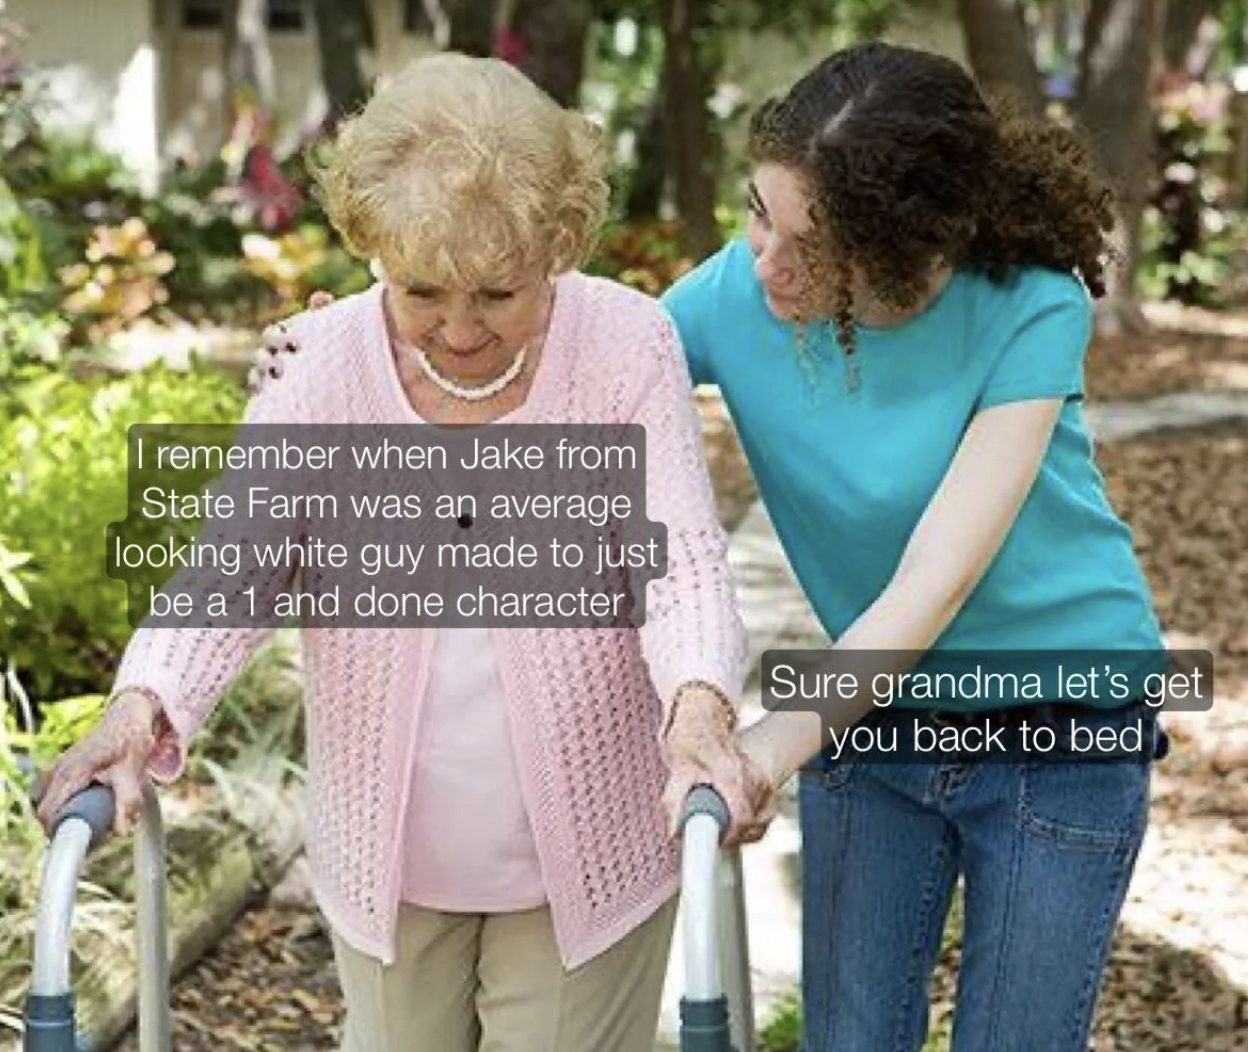 sure grandma meme - I remember when Jake from State Farm was an average looking white guy made to just be a 1 and done character S S Sure grandma let's get you back to bed